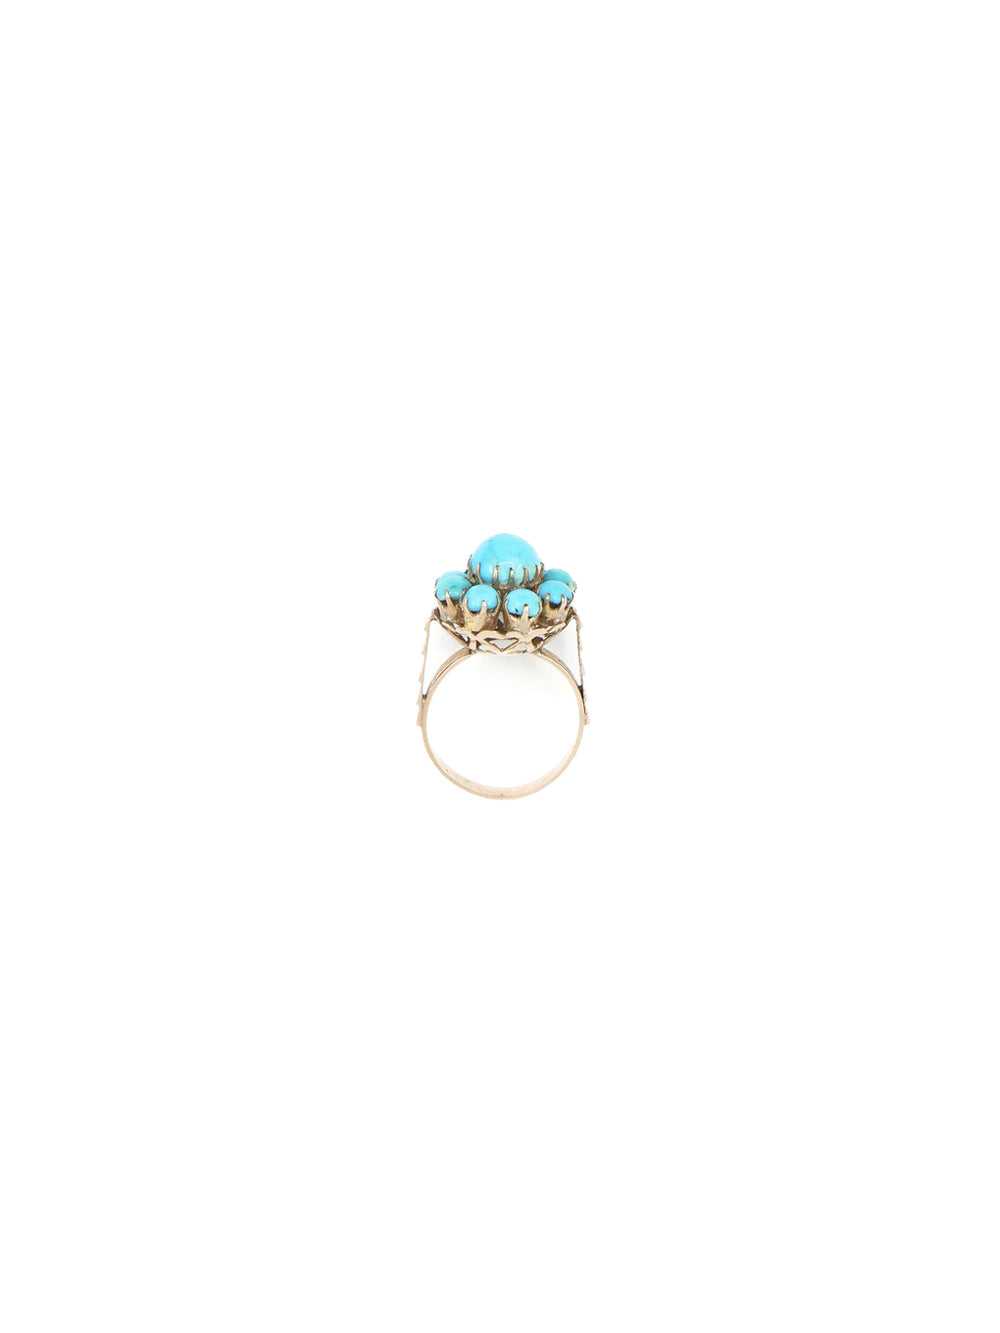 14K Turquoise Floral Cabochon Ring - image 4